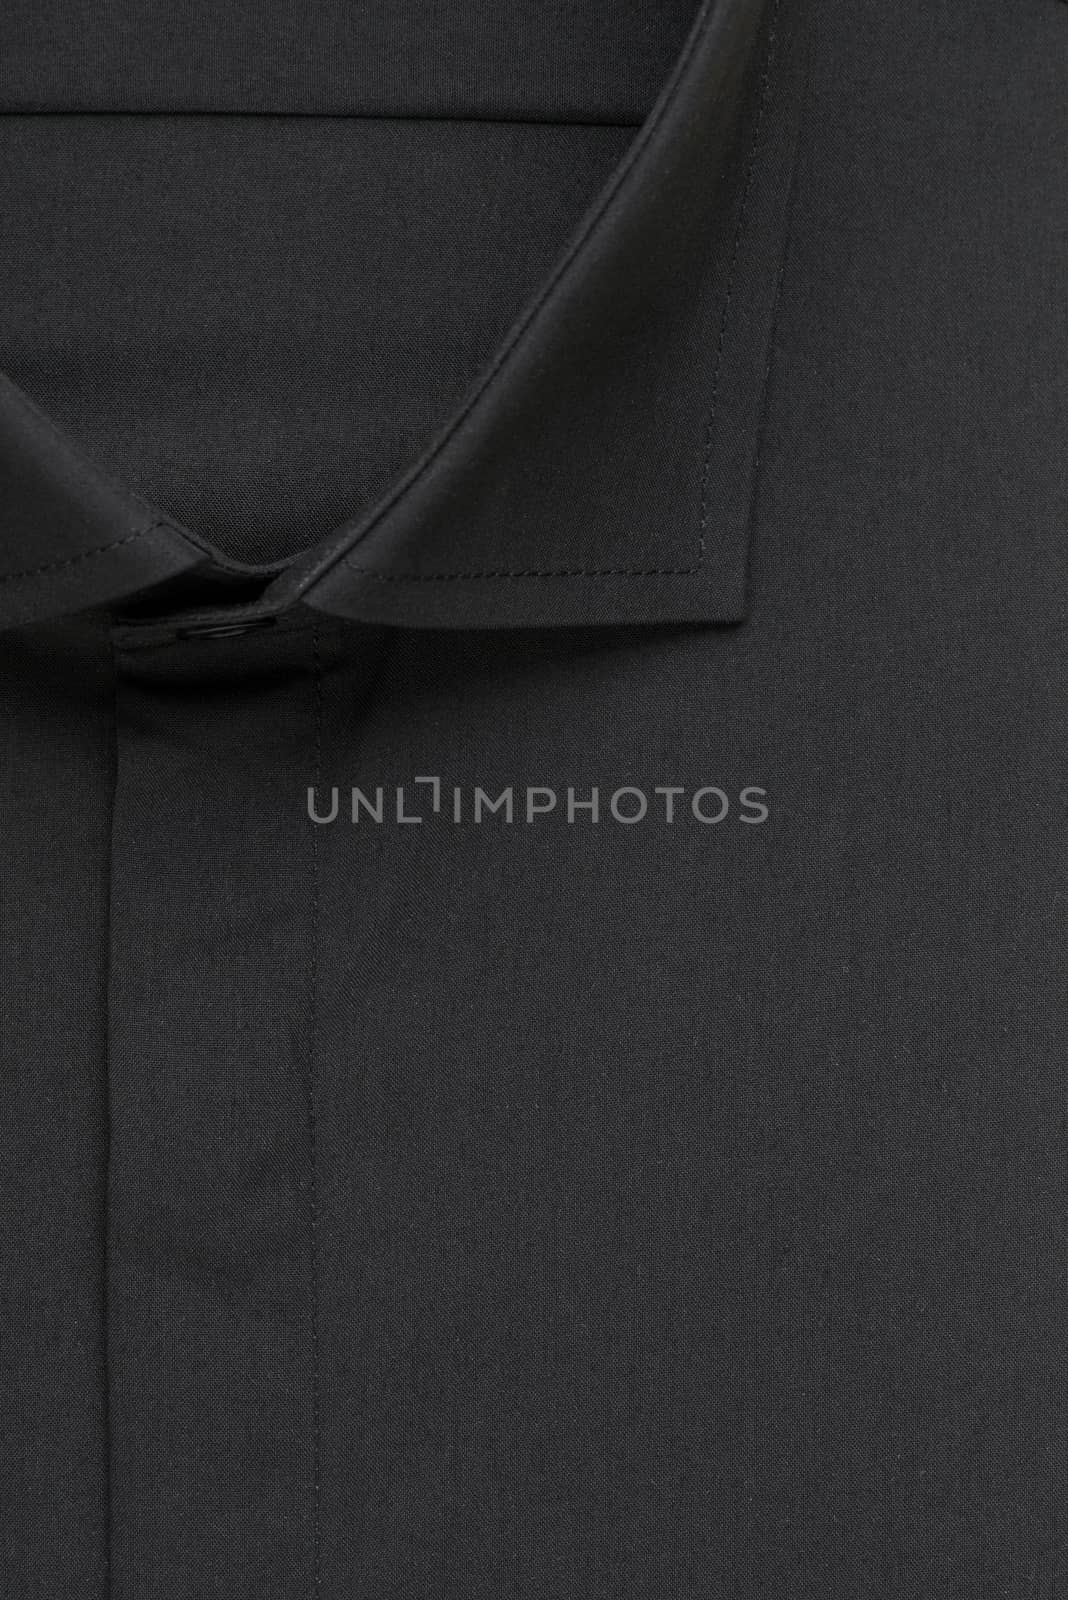 black shirt, detailed close-up collar and button, top view